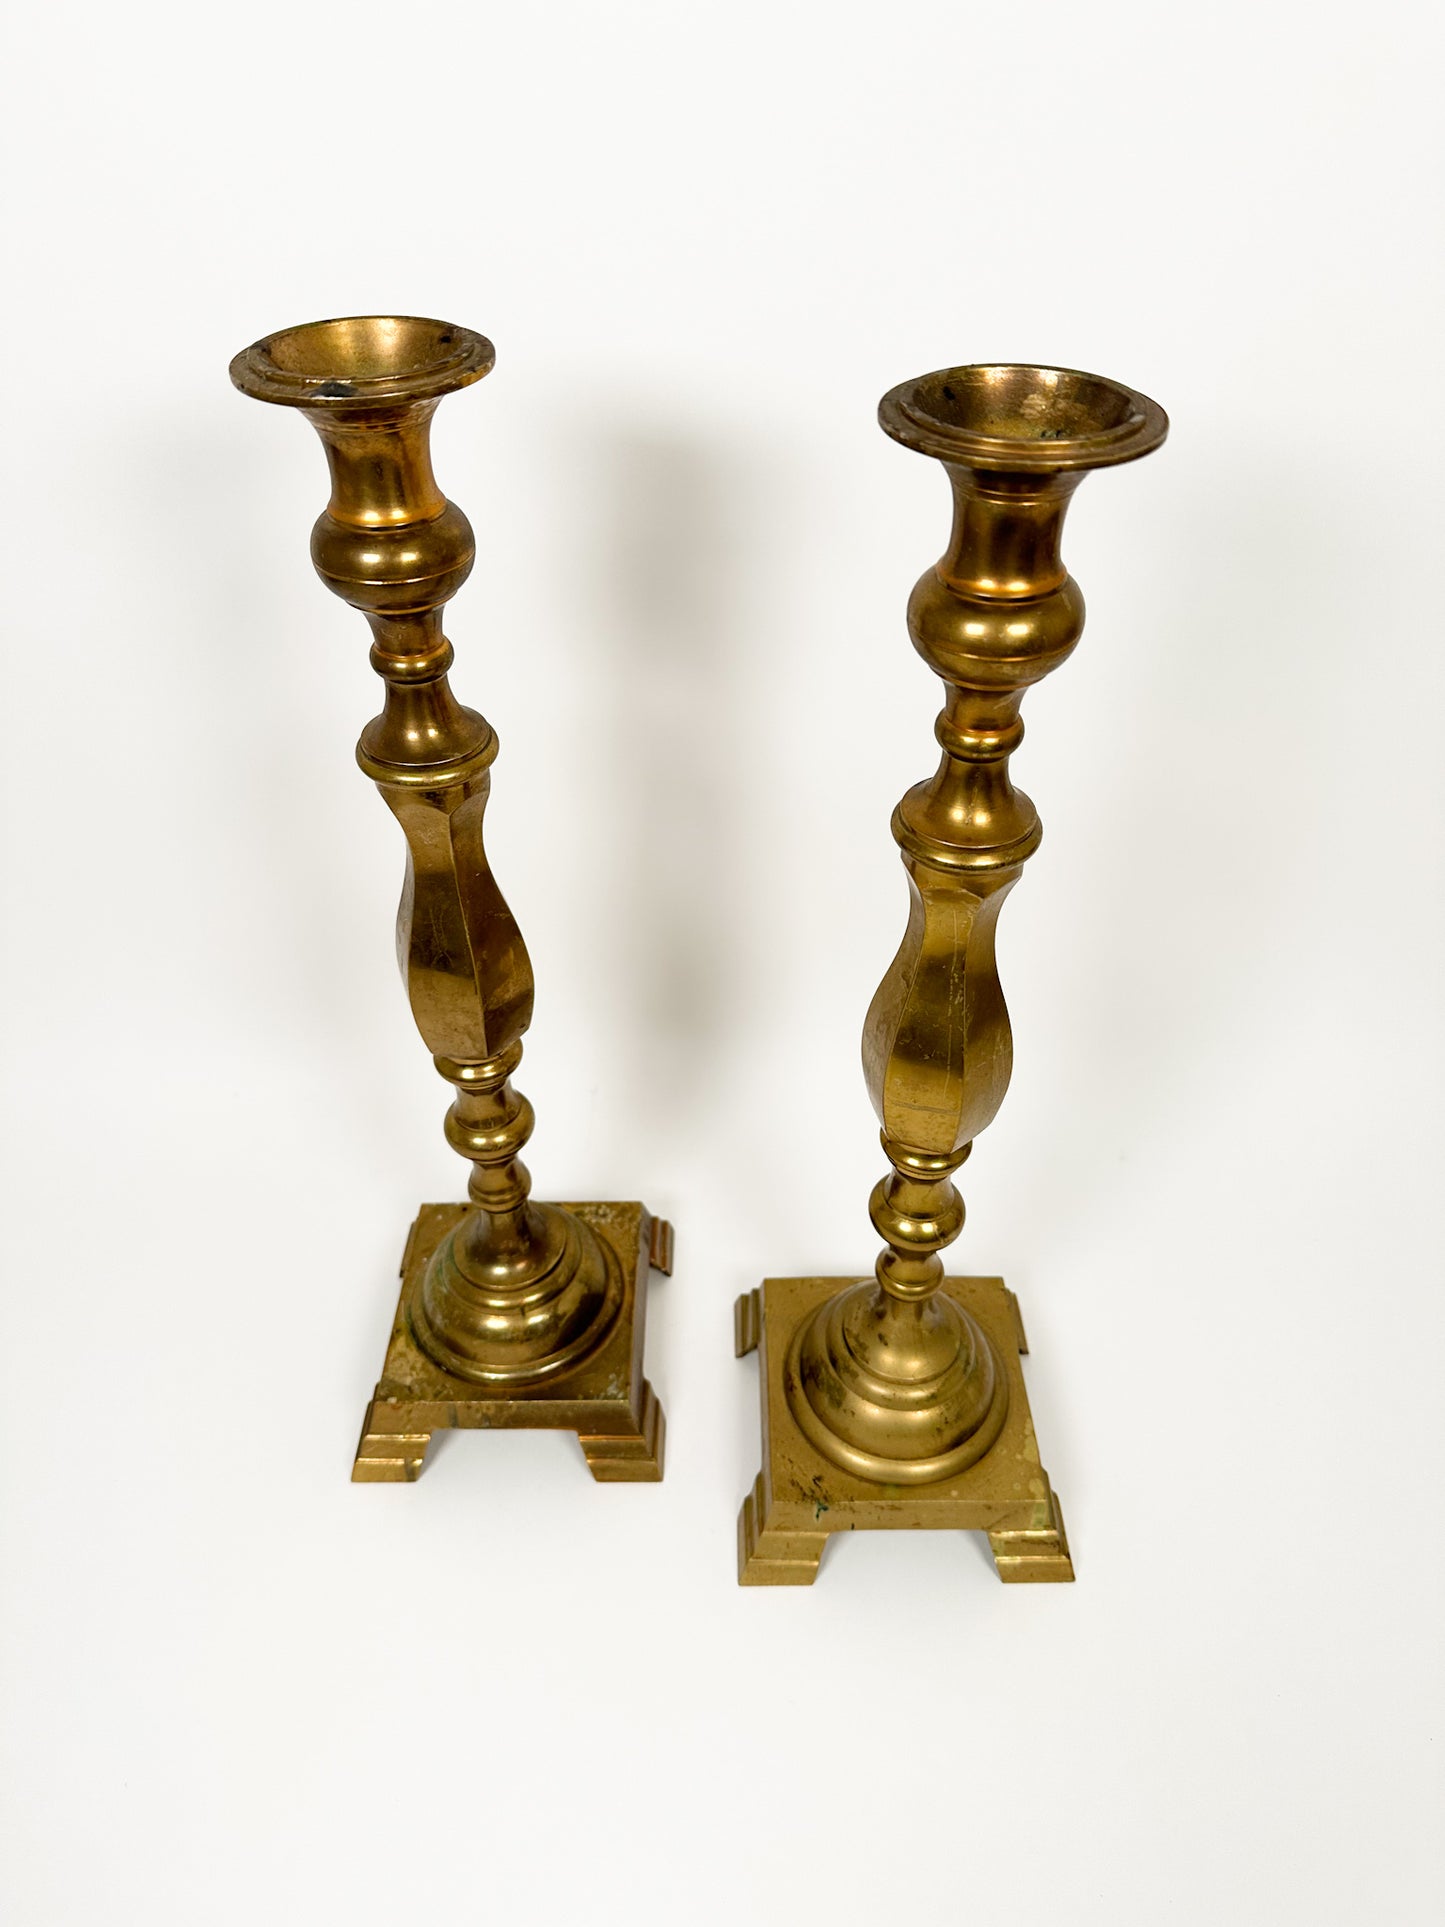 Large Brass Candle Holders